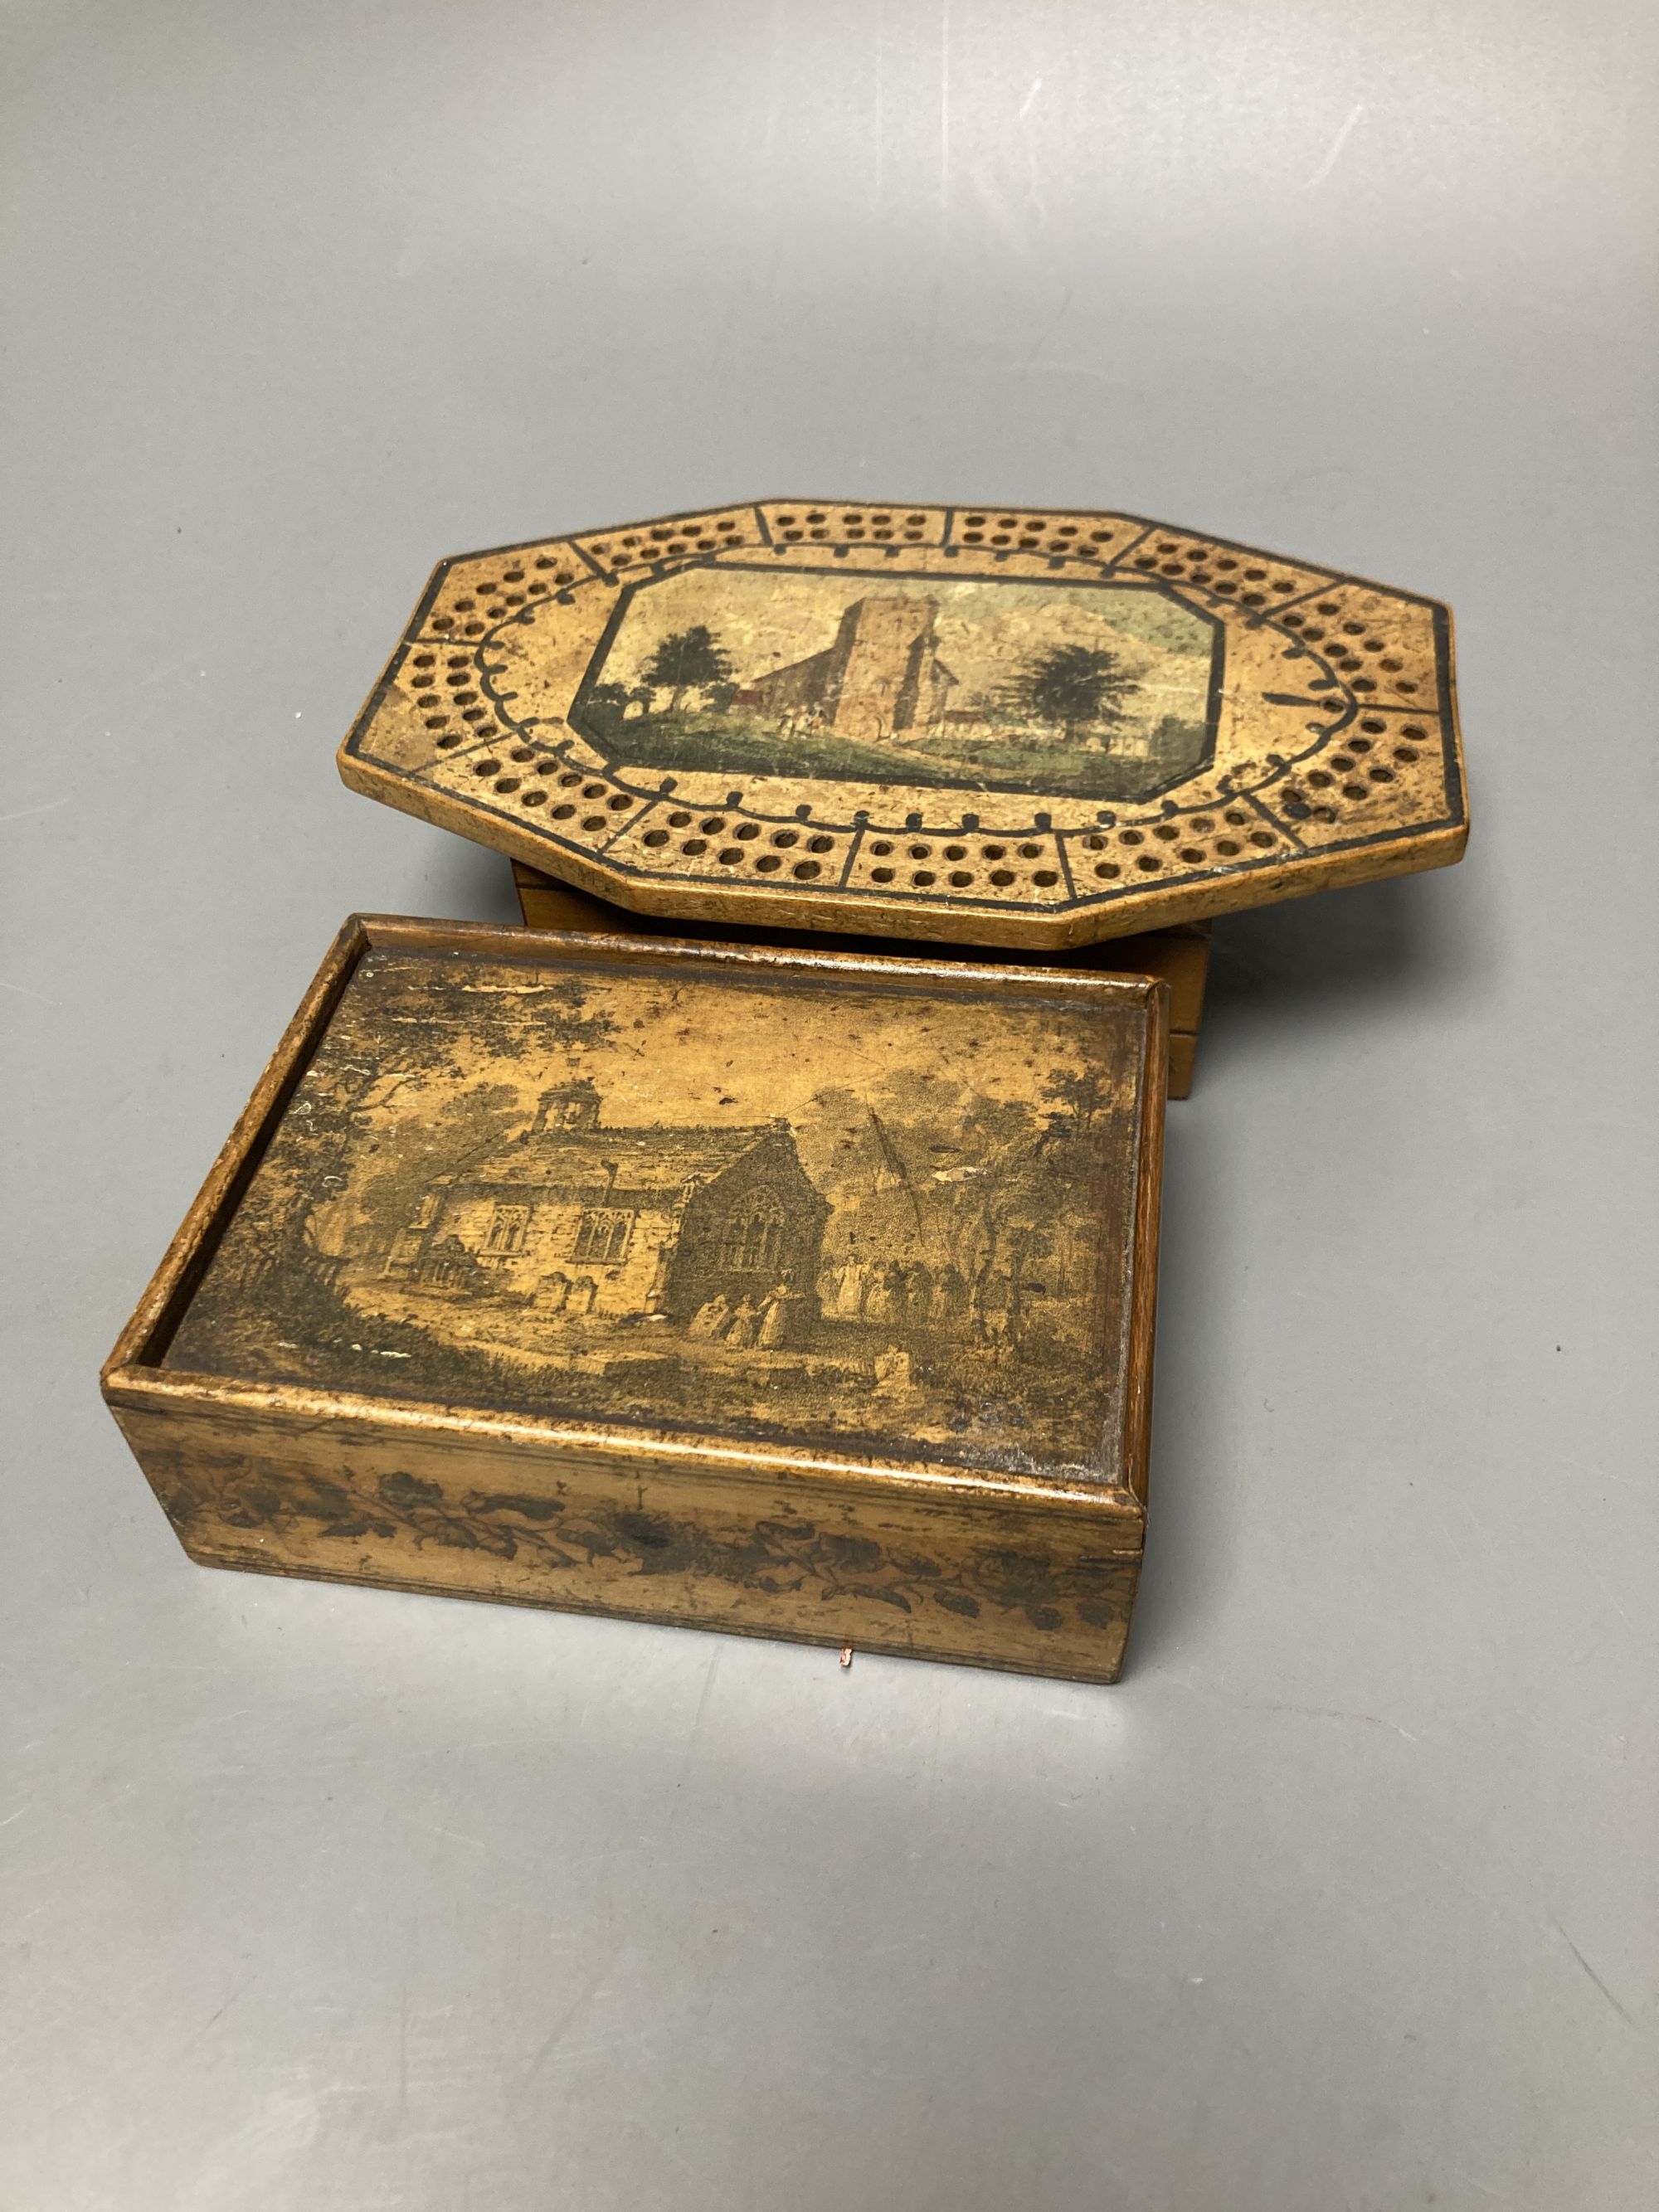 Two early Tunbridge ware sycamore boxes with views of Sussex? churches, early 19th century, 12.5 and 18cm